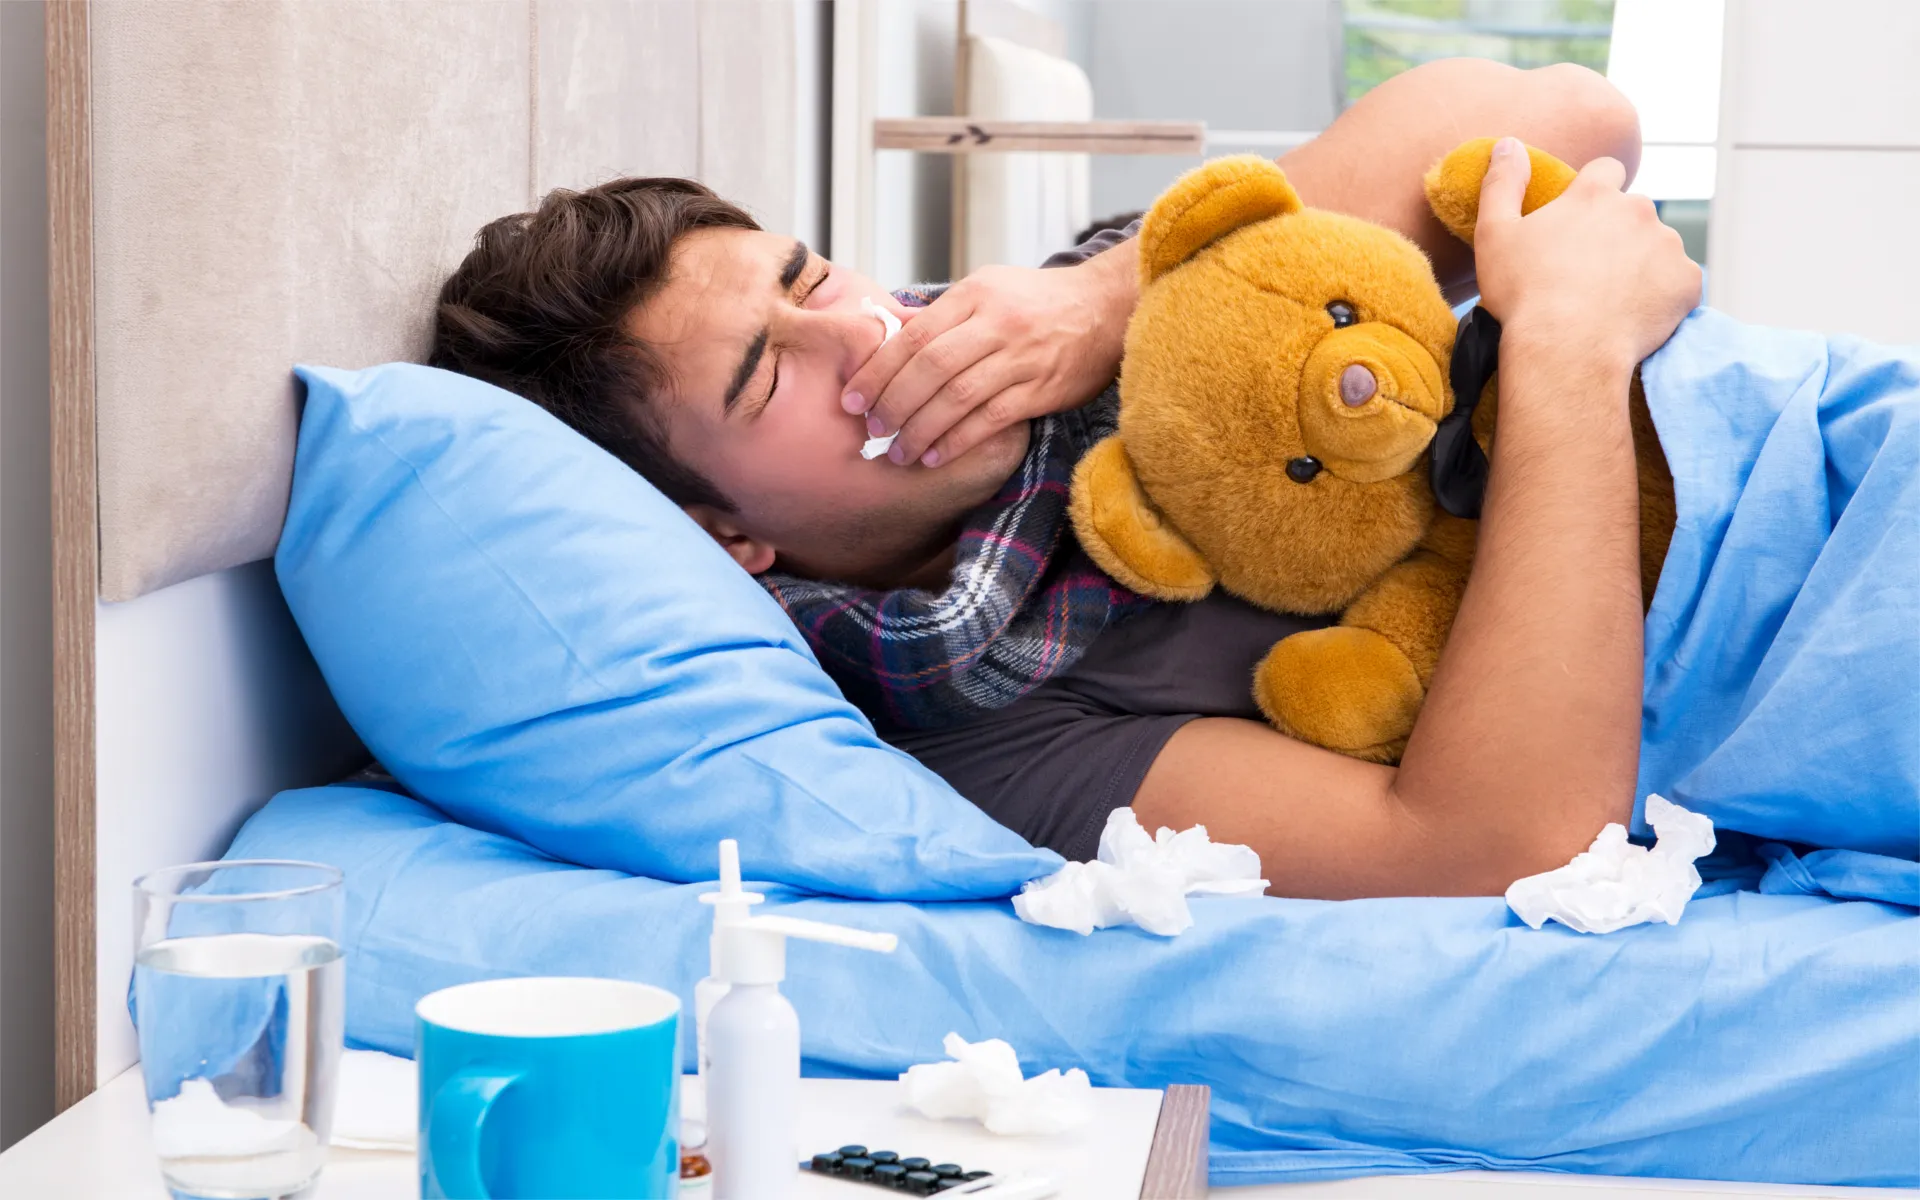 Is the “Man Flu” Real?